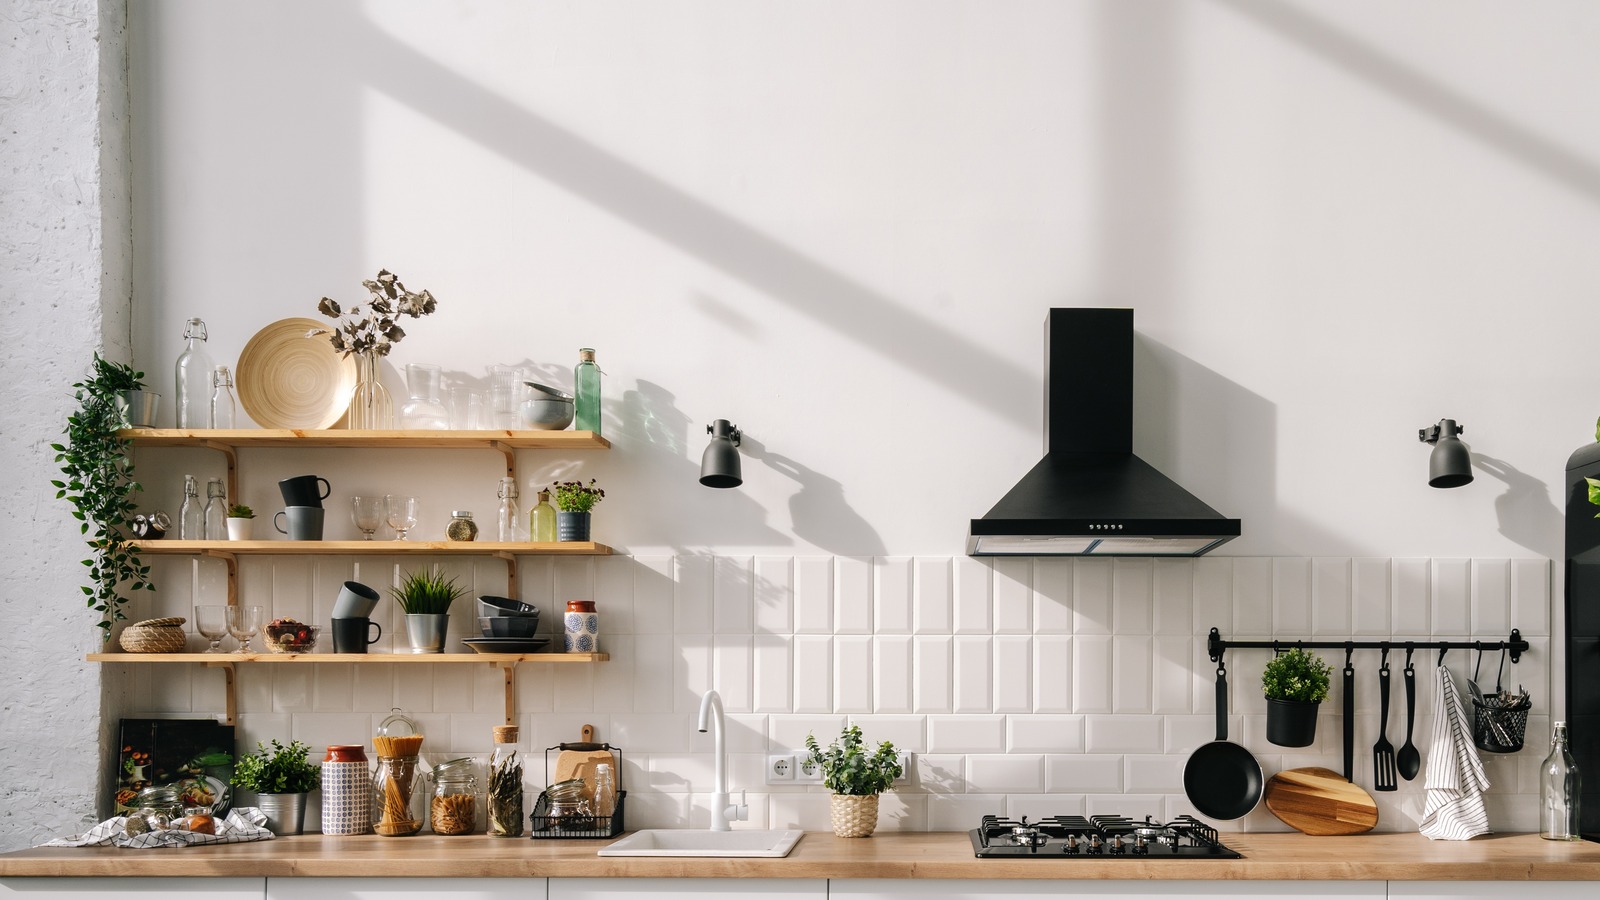 This Genius Dollar Tree Product Will Maximize Your Kitchen Wall Storage